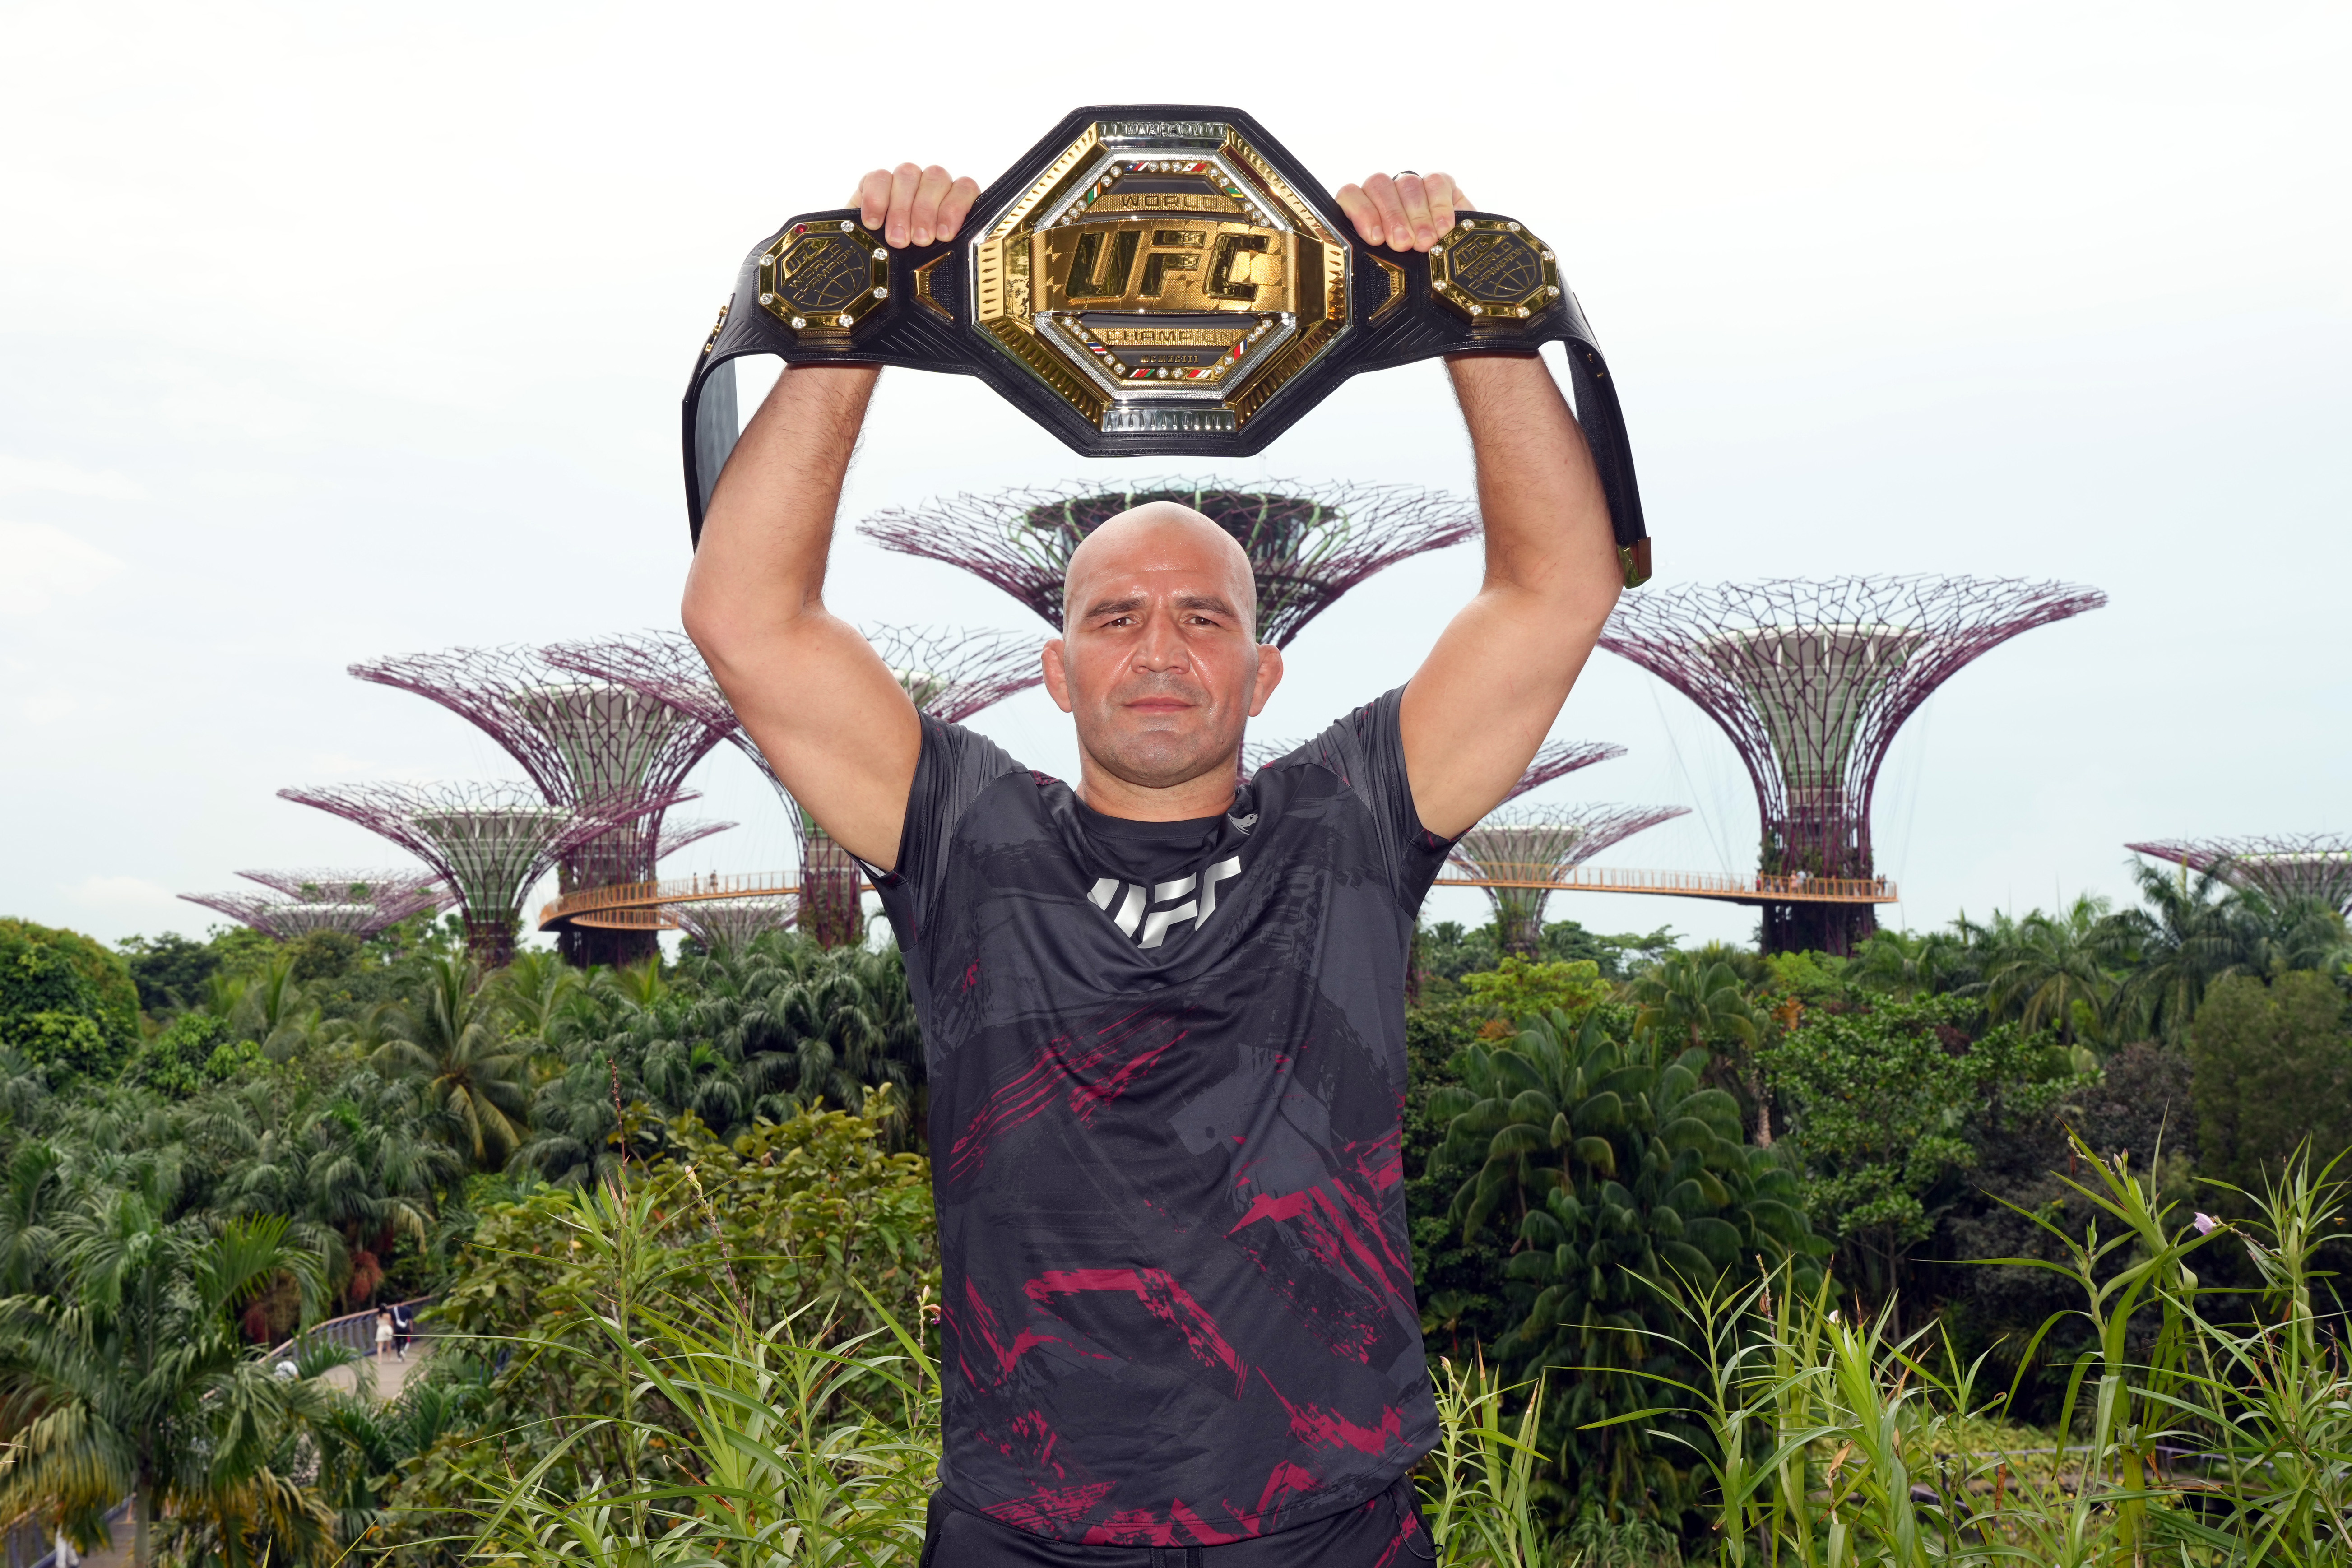 UFC light heavyweight champion Glover Texeira of Brazil poses during a UFC photo session at Gardens by the Bay on June 7, 2022 in Singapore.